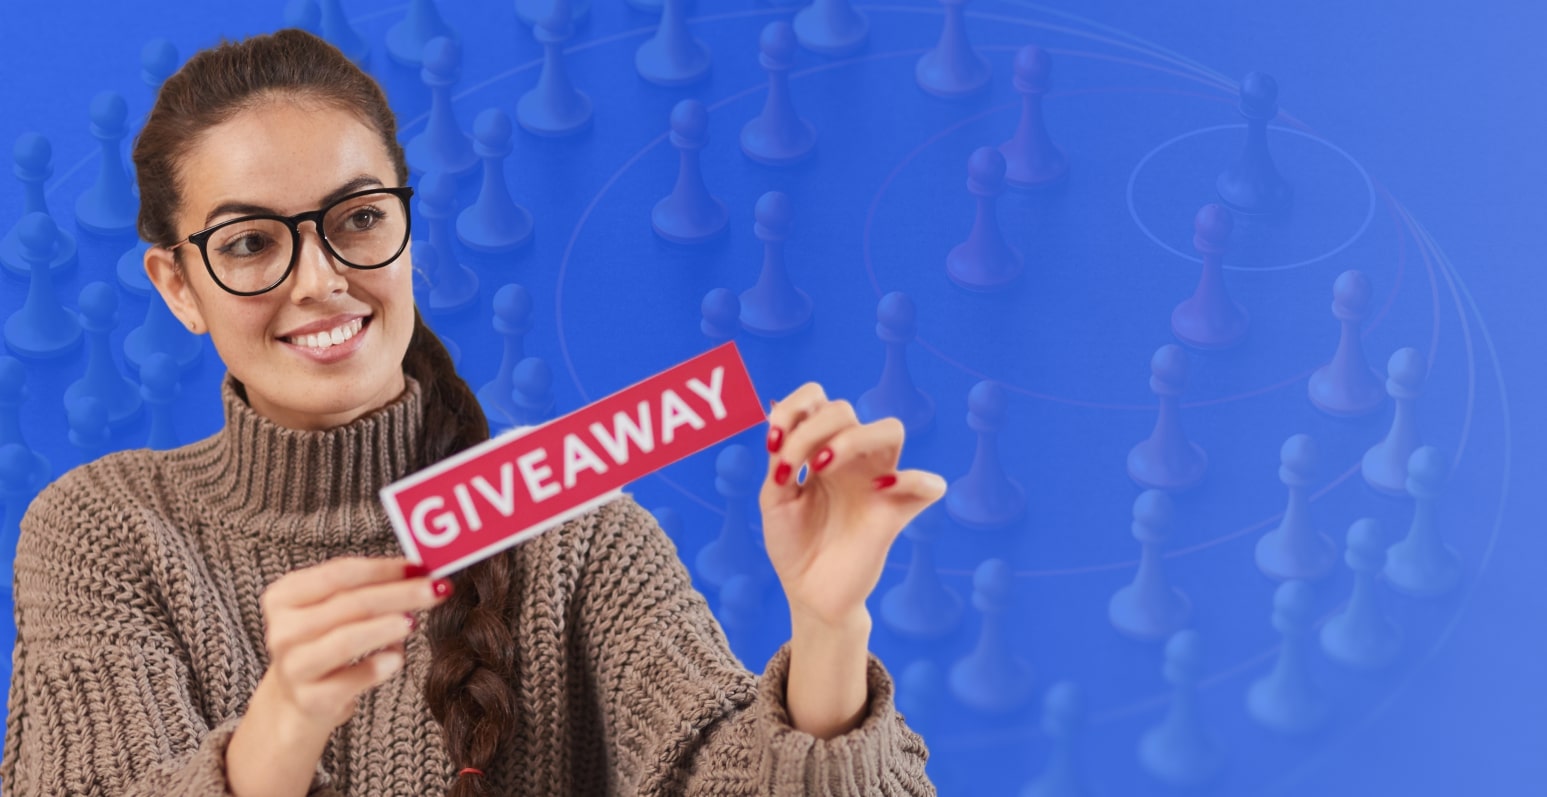 A woman in her 30s is holding with both hands a piece of paper with a red background that reads "GIVEAWAY" in capital letters. She is standing in front of a blue background with chess pieces with very low opacity